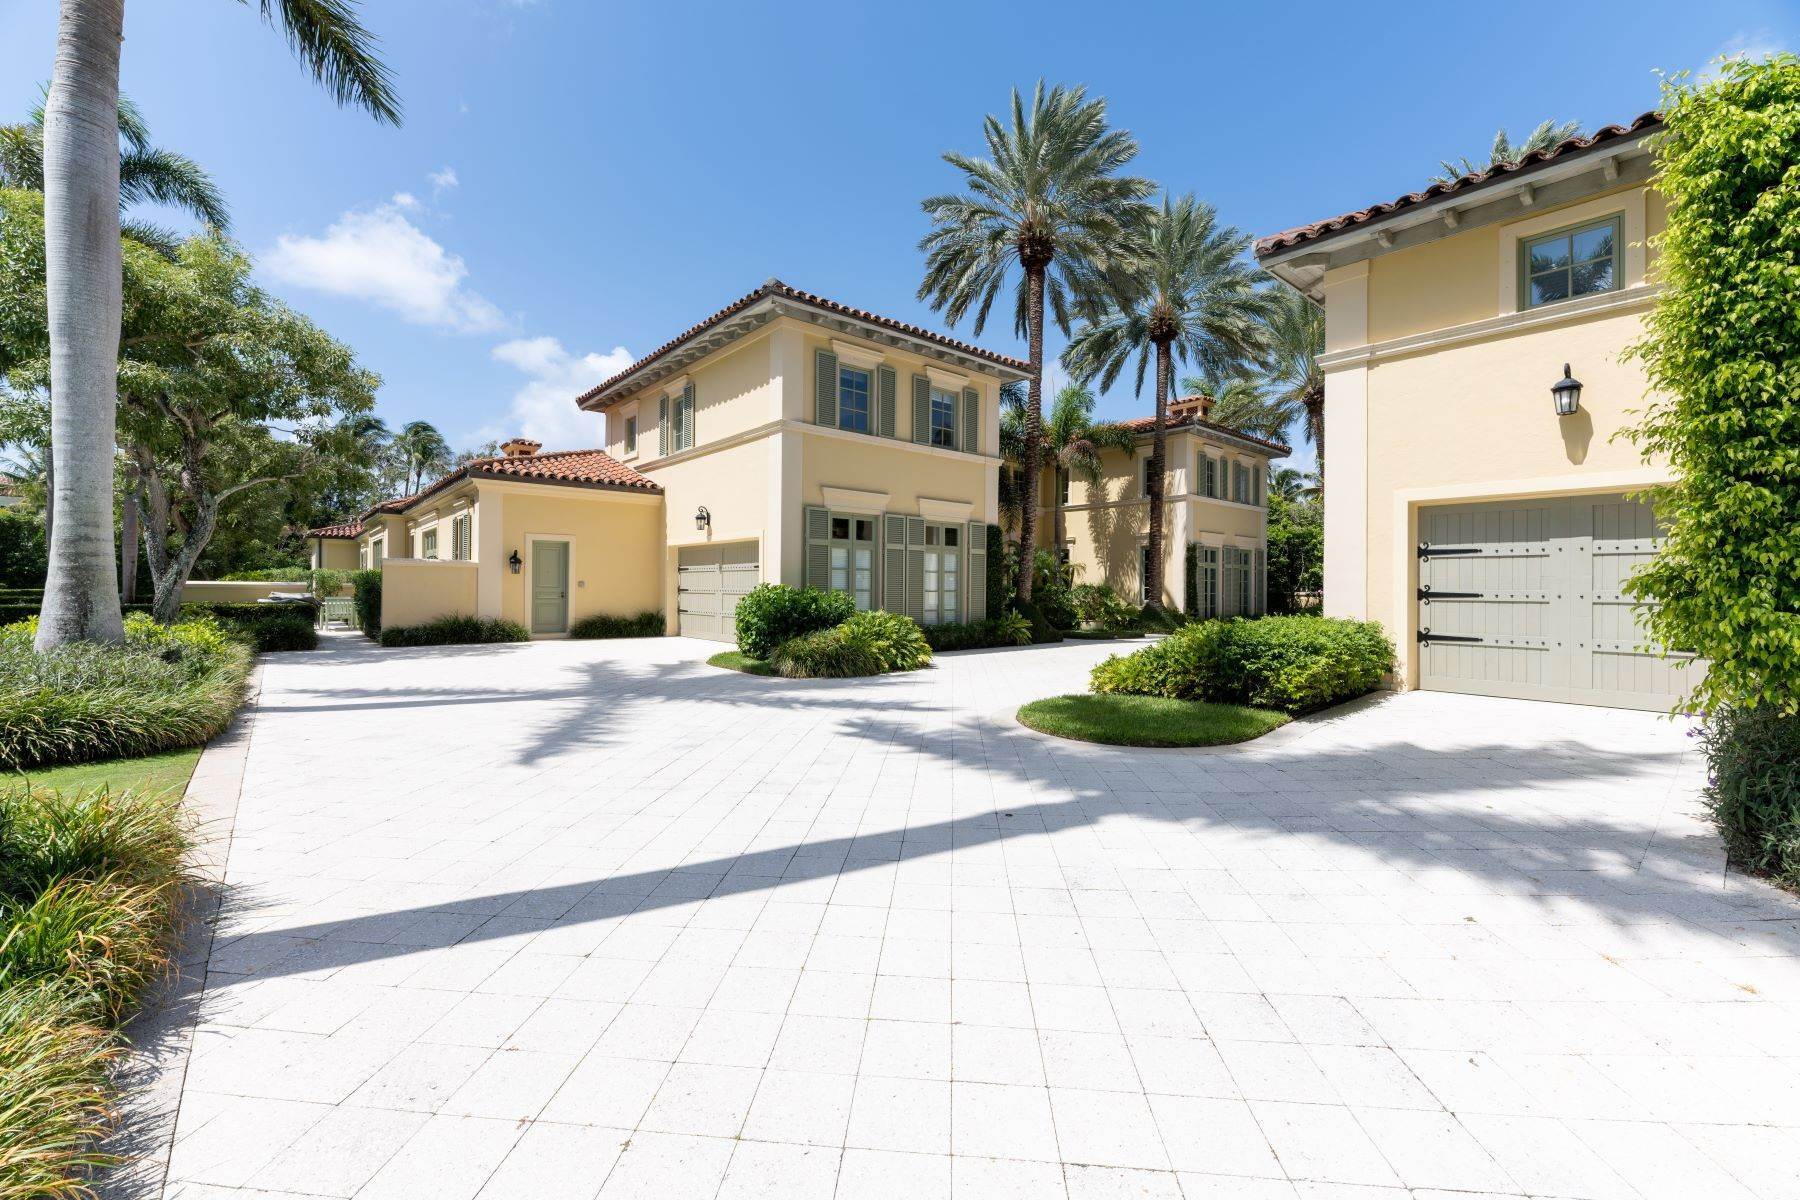 39. Single Family Homes for Sale at 1.5 Acre Palm Beach Estate 160 Clarendon Avenue Palm Beach, Florida 33480 United States